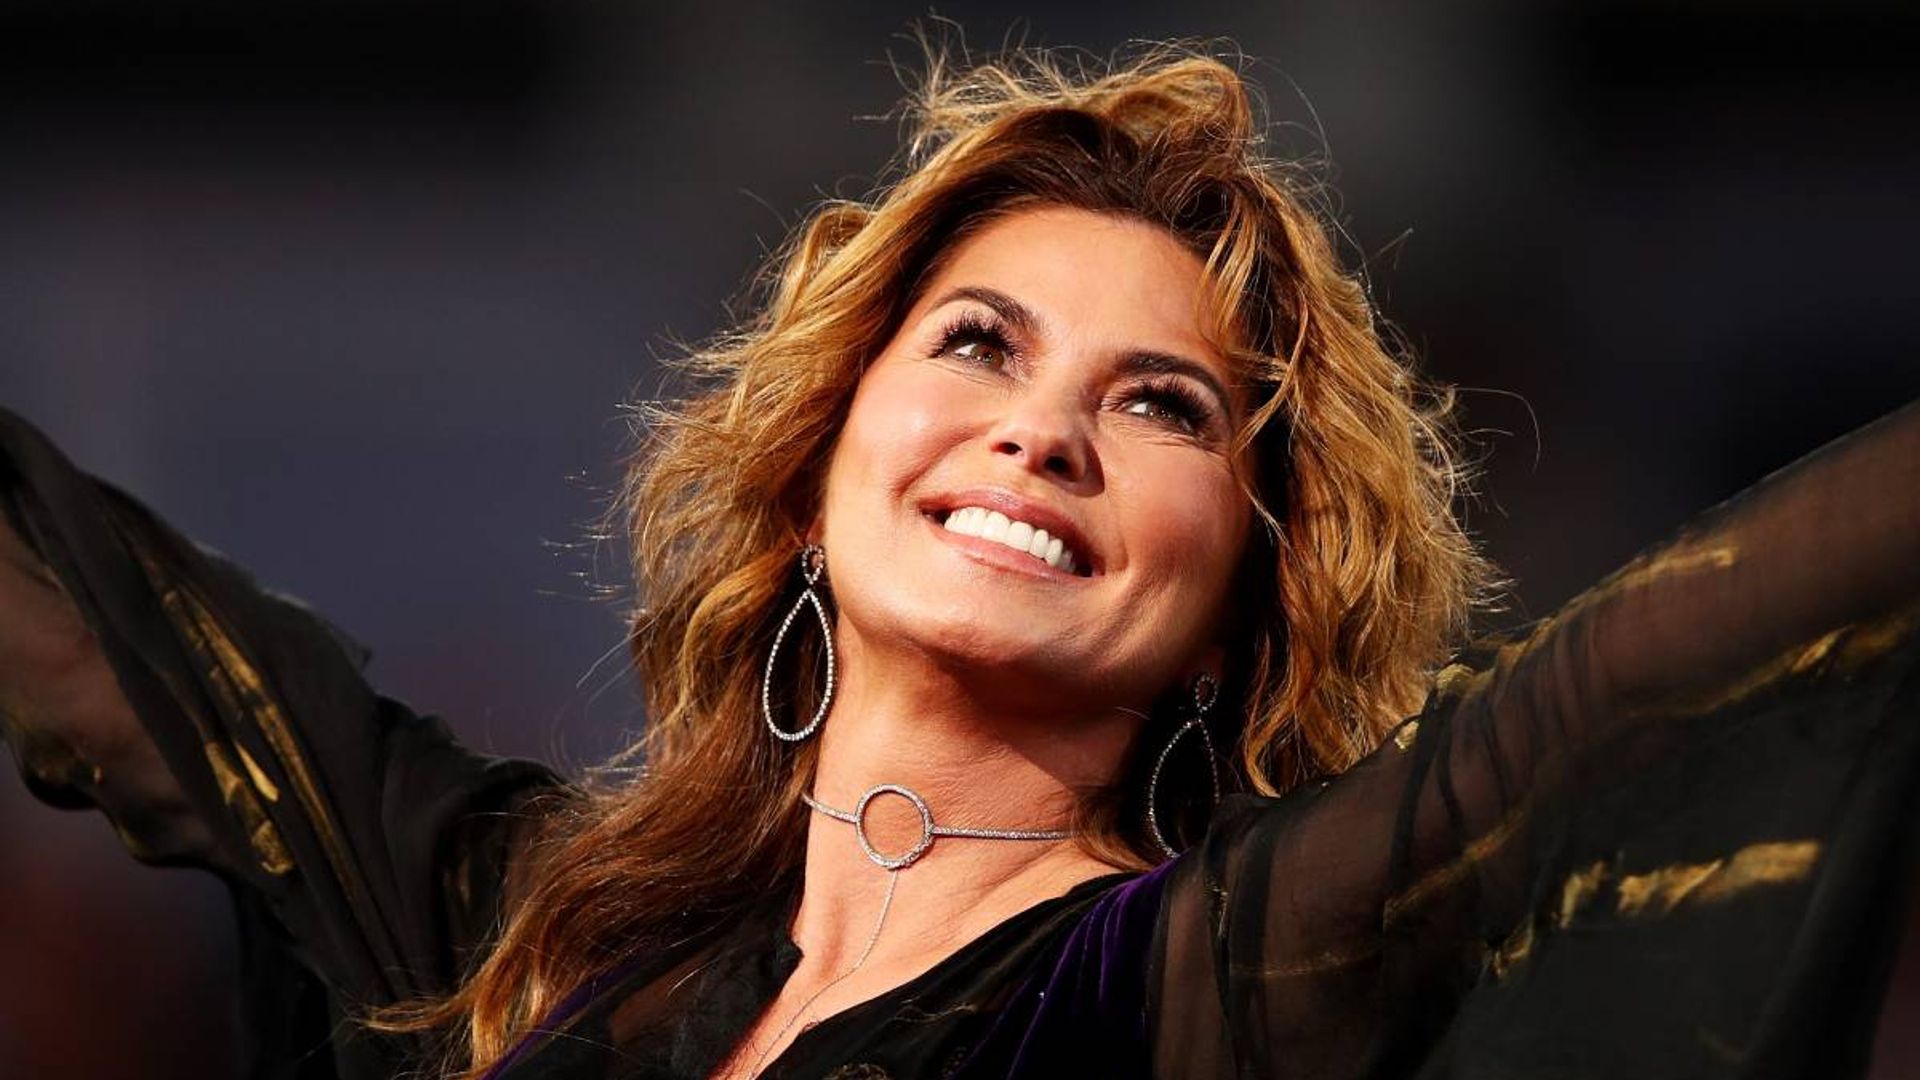 Shania Twain took to Instagram to share a jaw-dropping music video. 